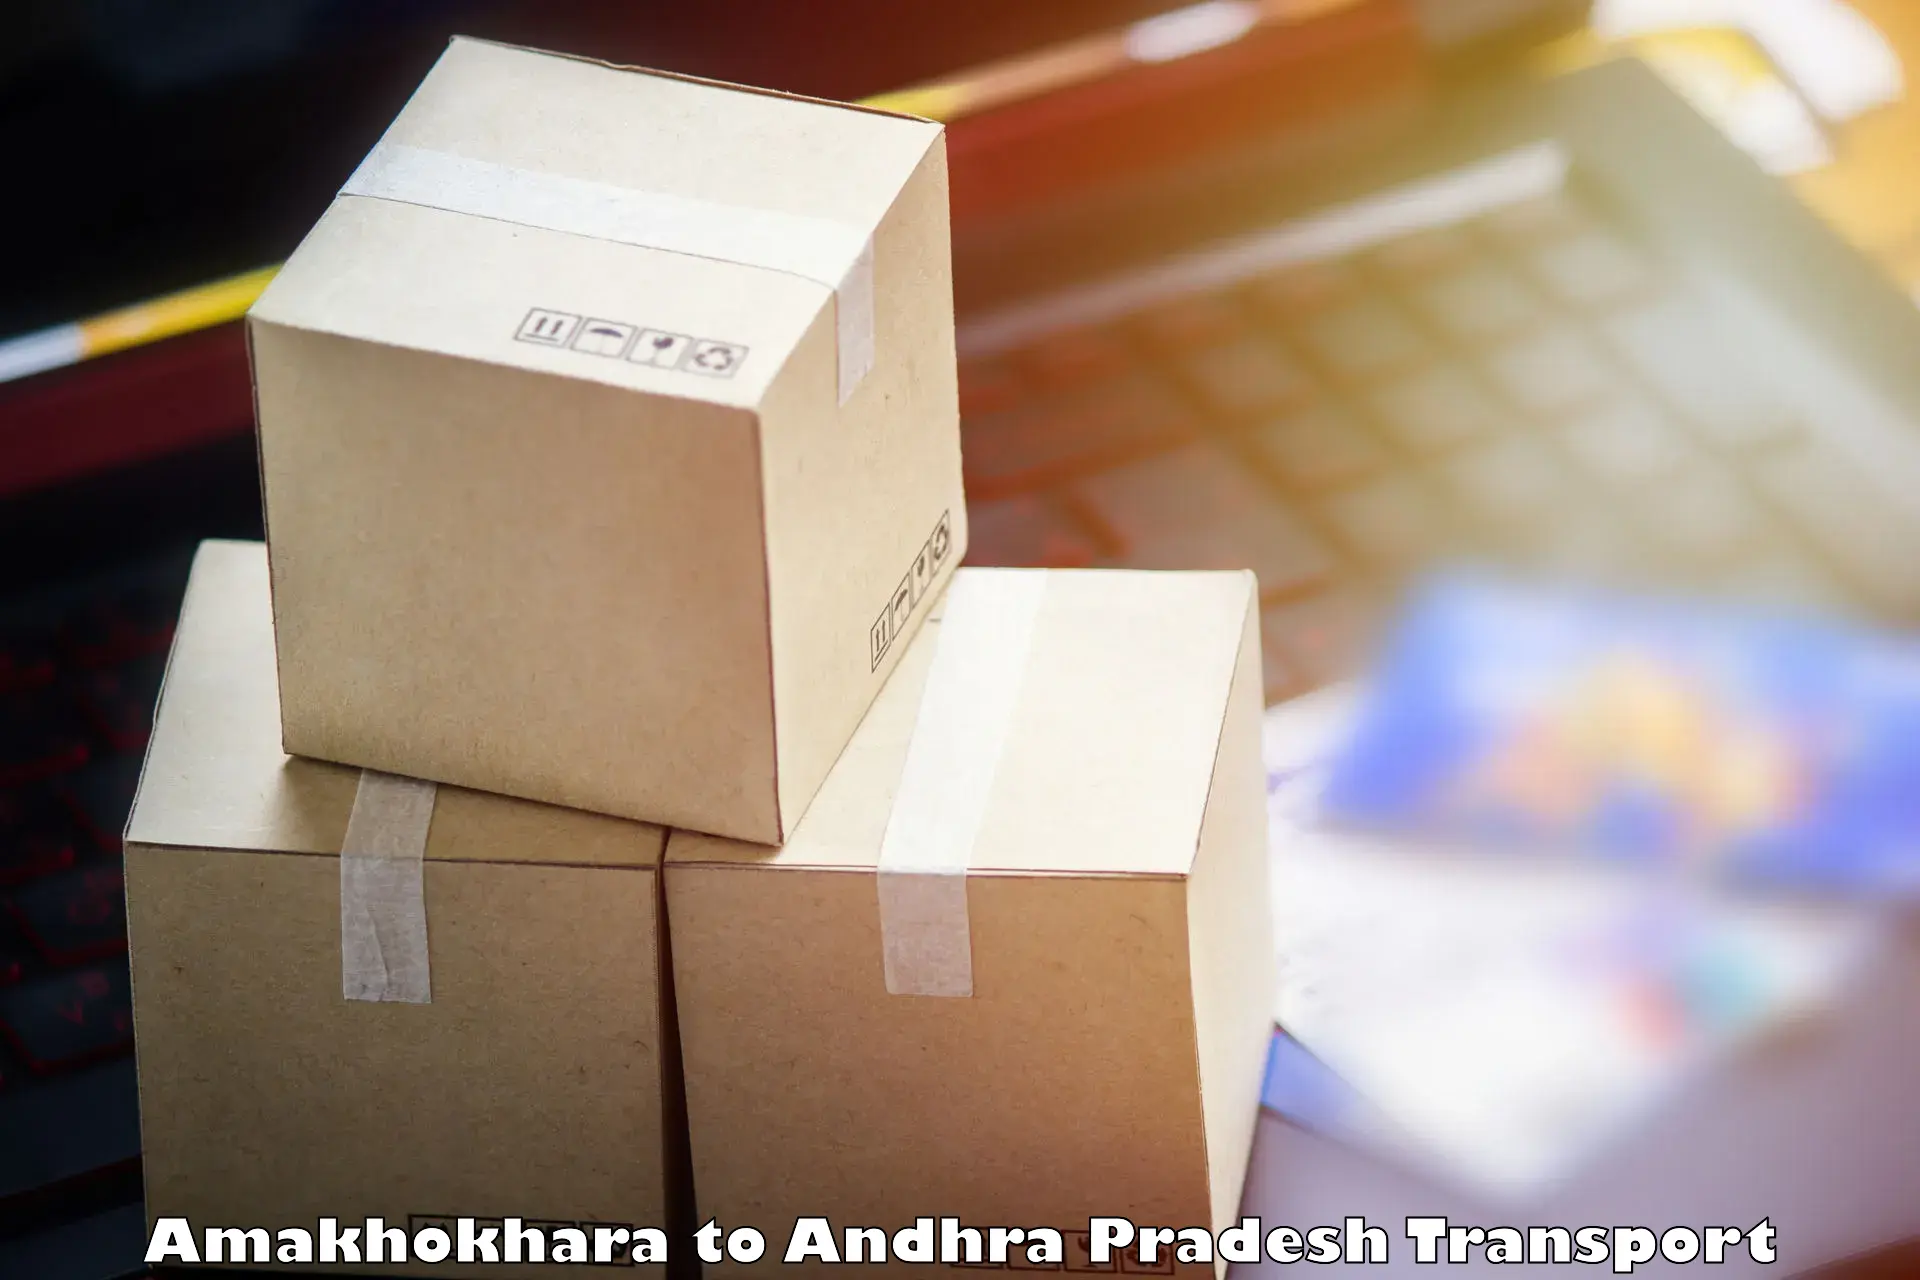 Truck transport companies in India Amakhokhara to Alur